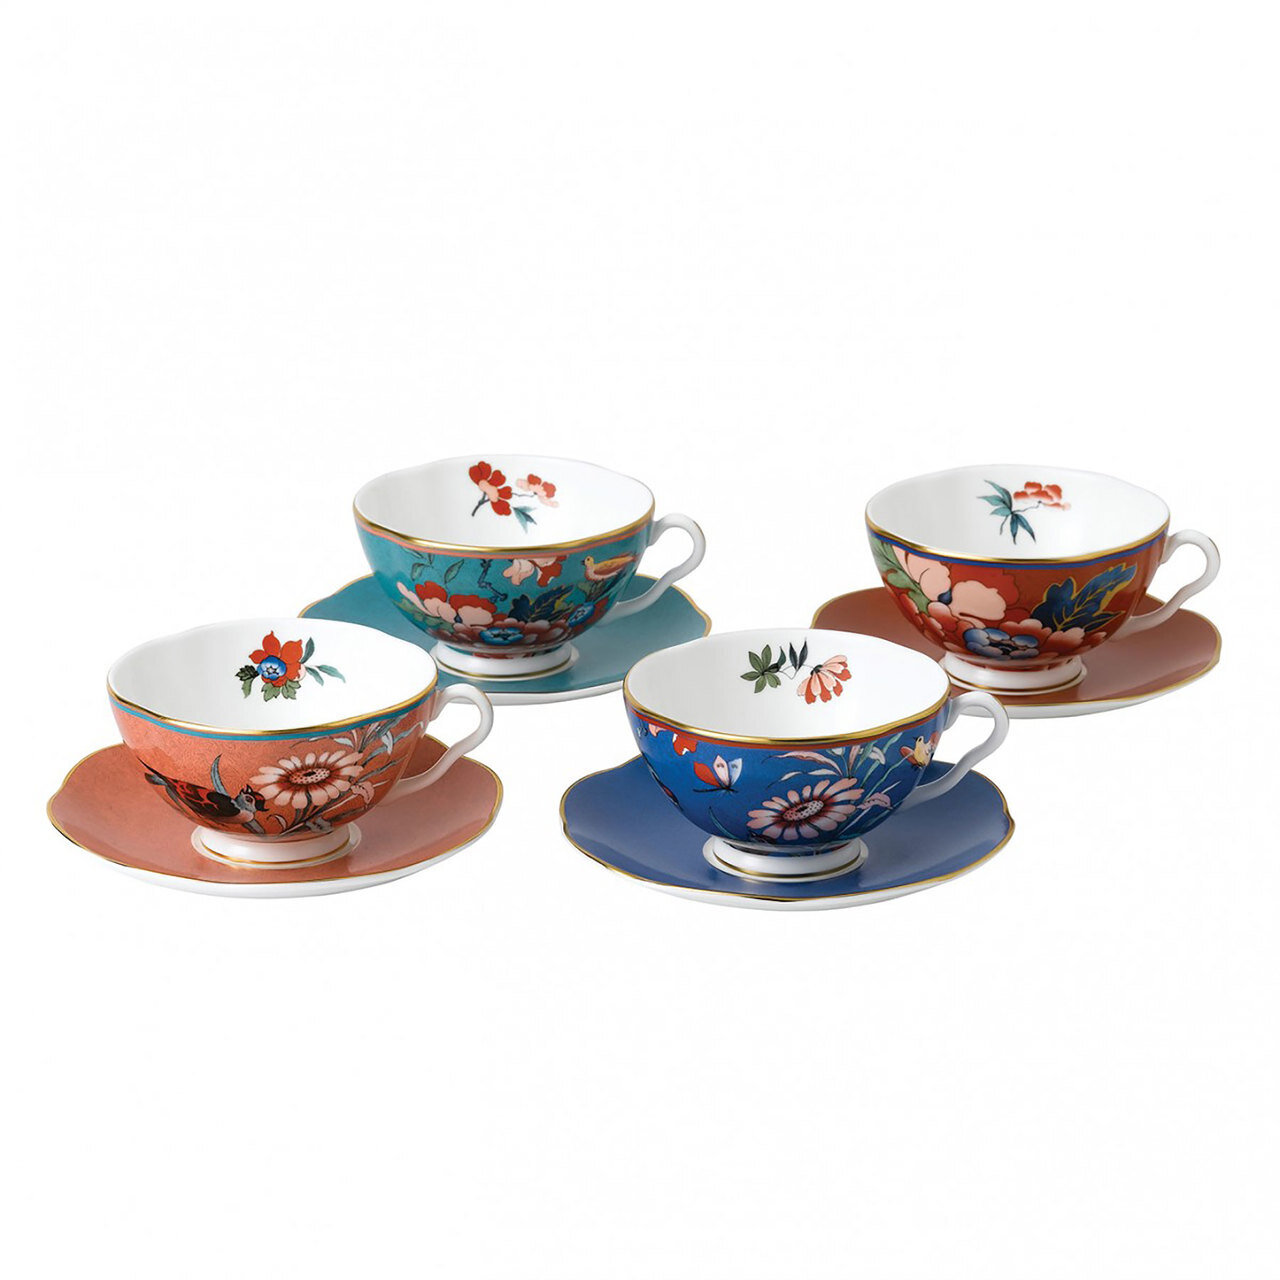 Wedgwood Paeonia Blush Teacup & saucer Set of 4 (Blue, Coral, Green & Red) 40035094